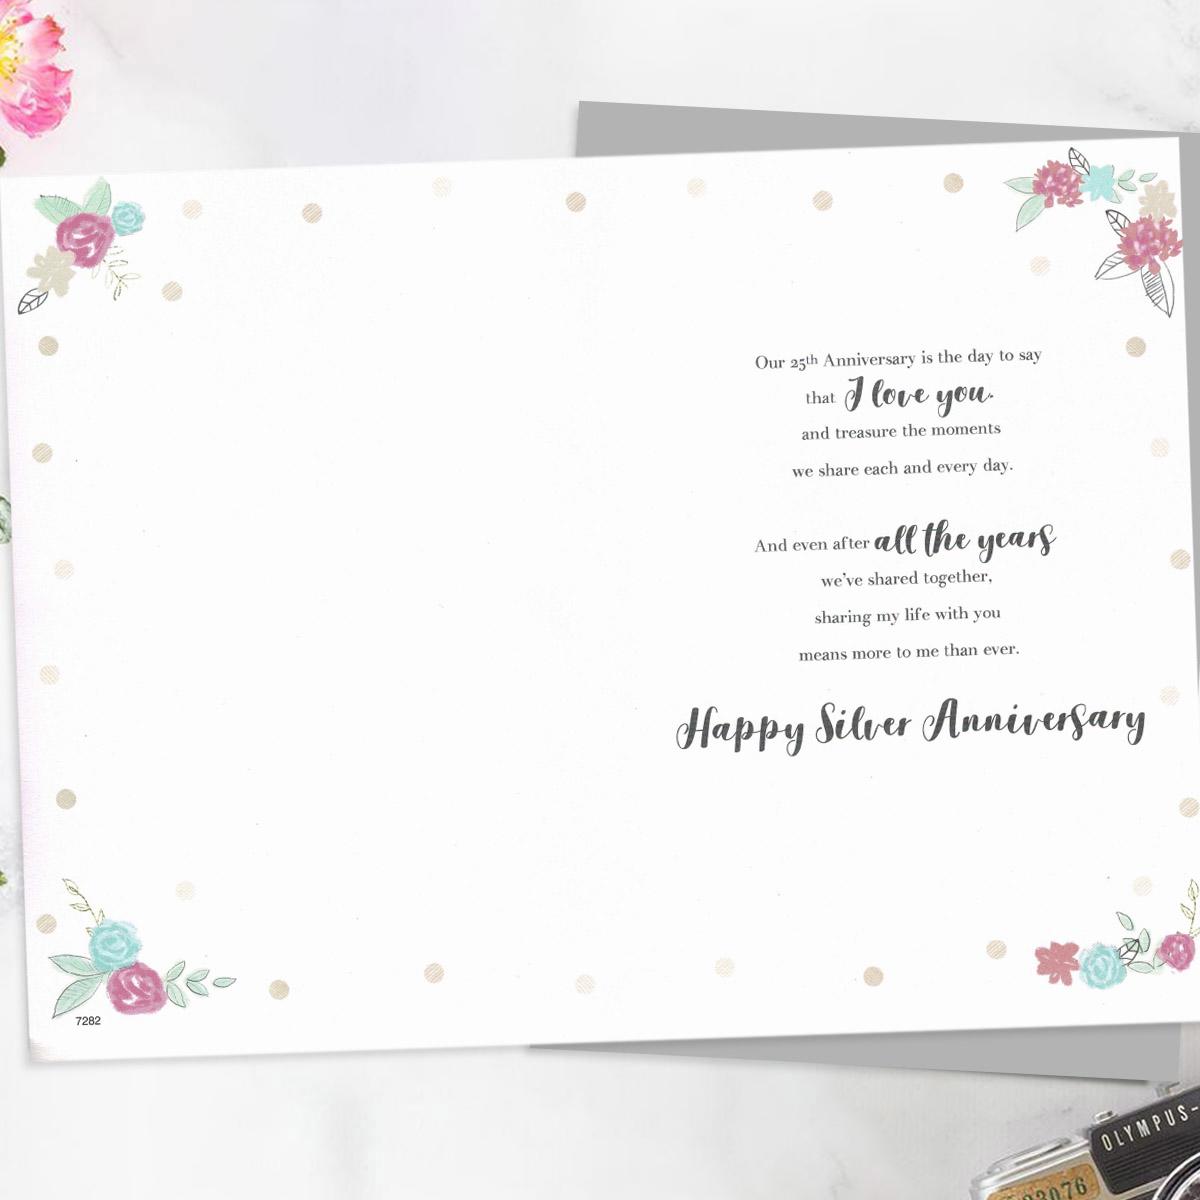 Inside Image Of Wife 25th Anniversary Card Showing Layout And Printed Text